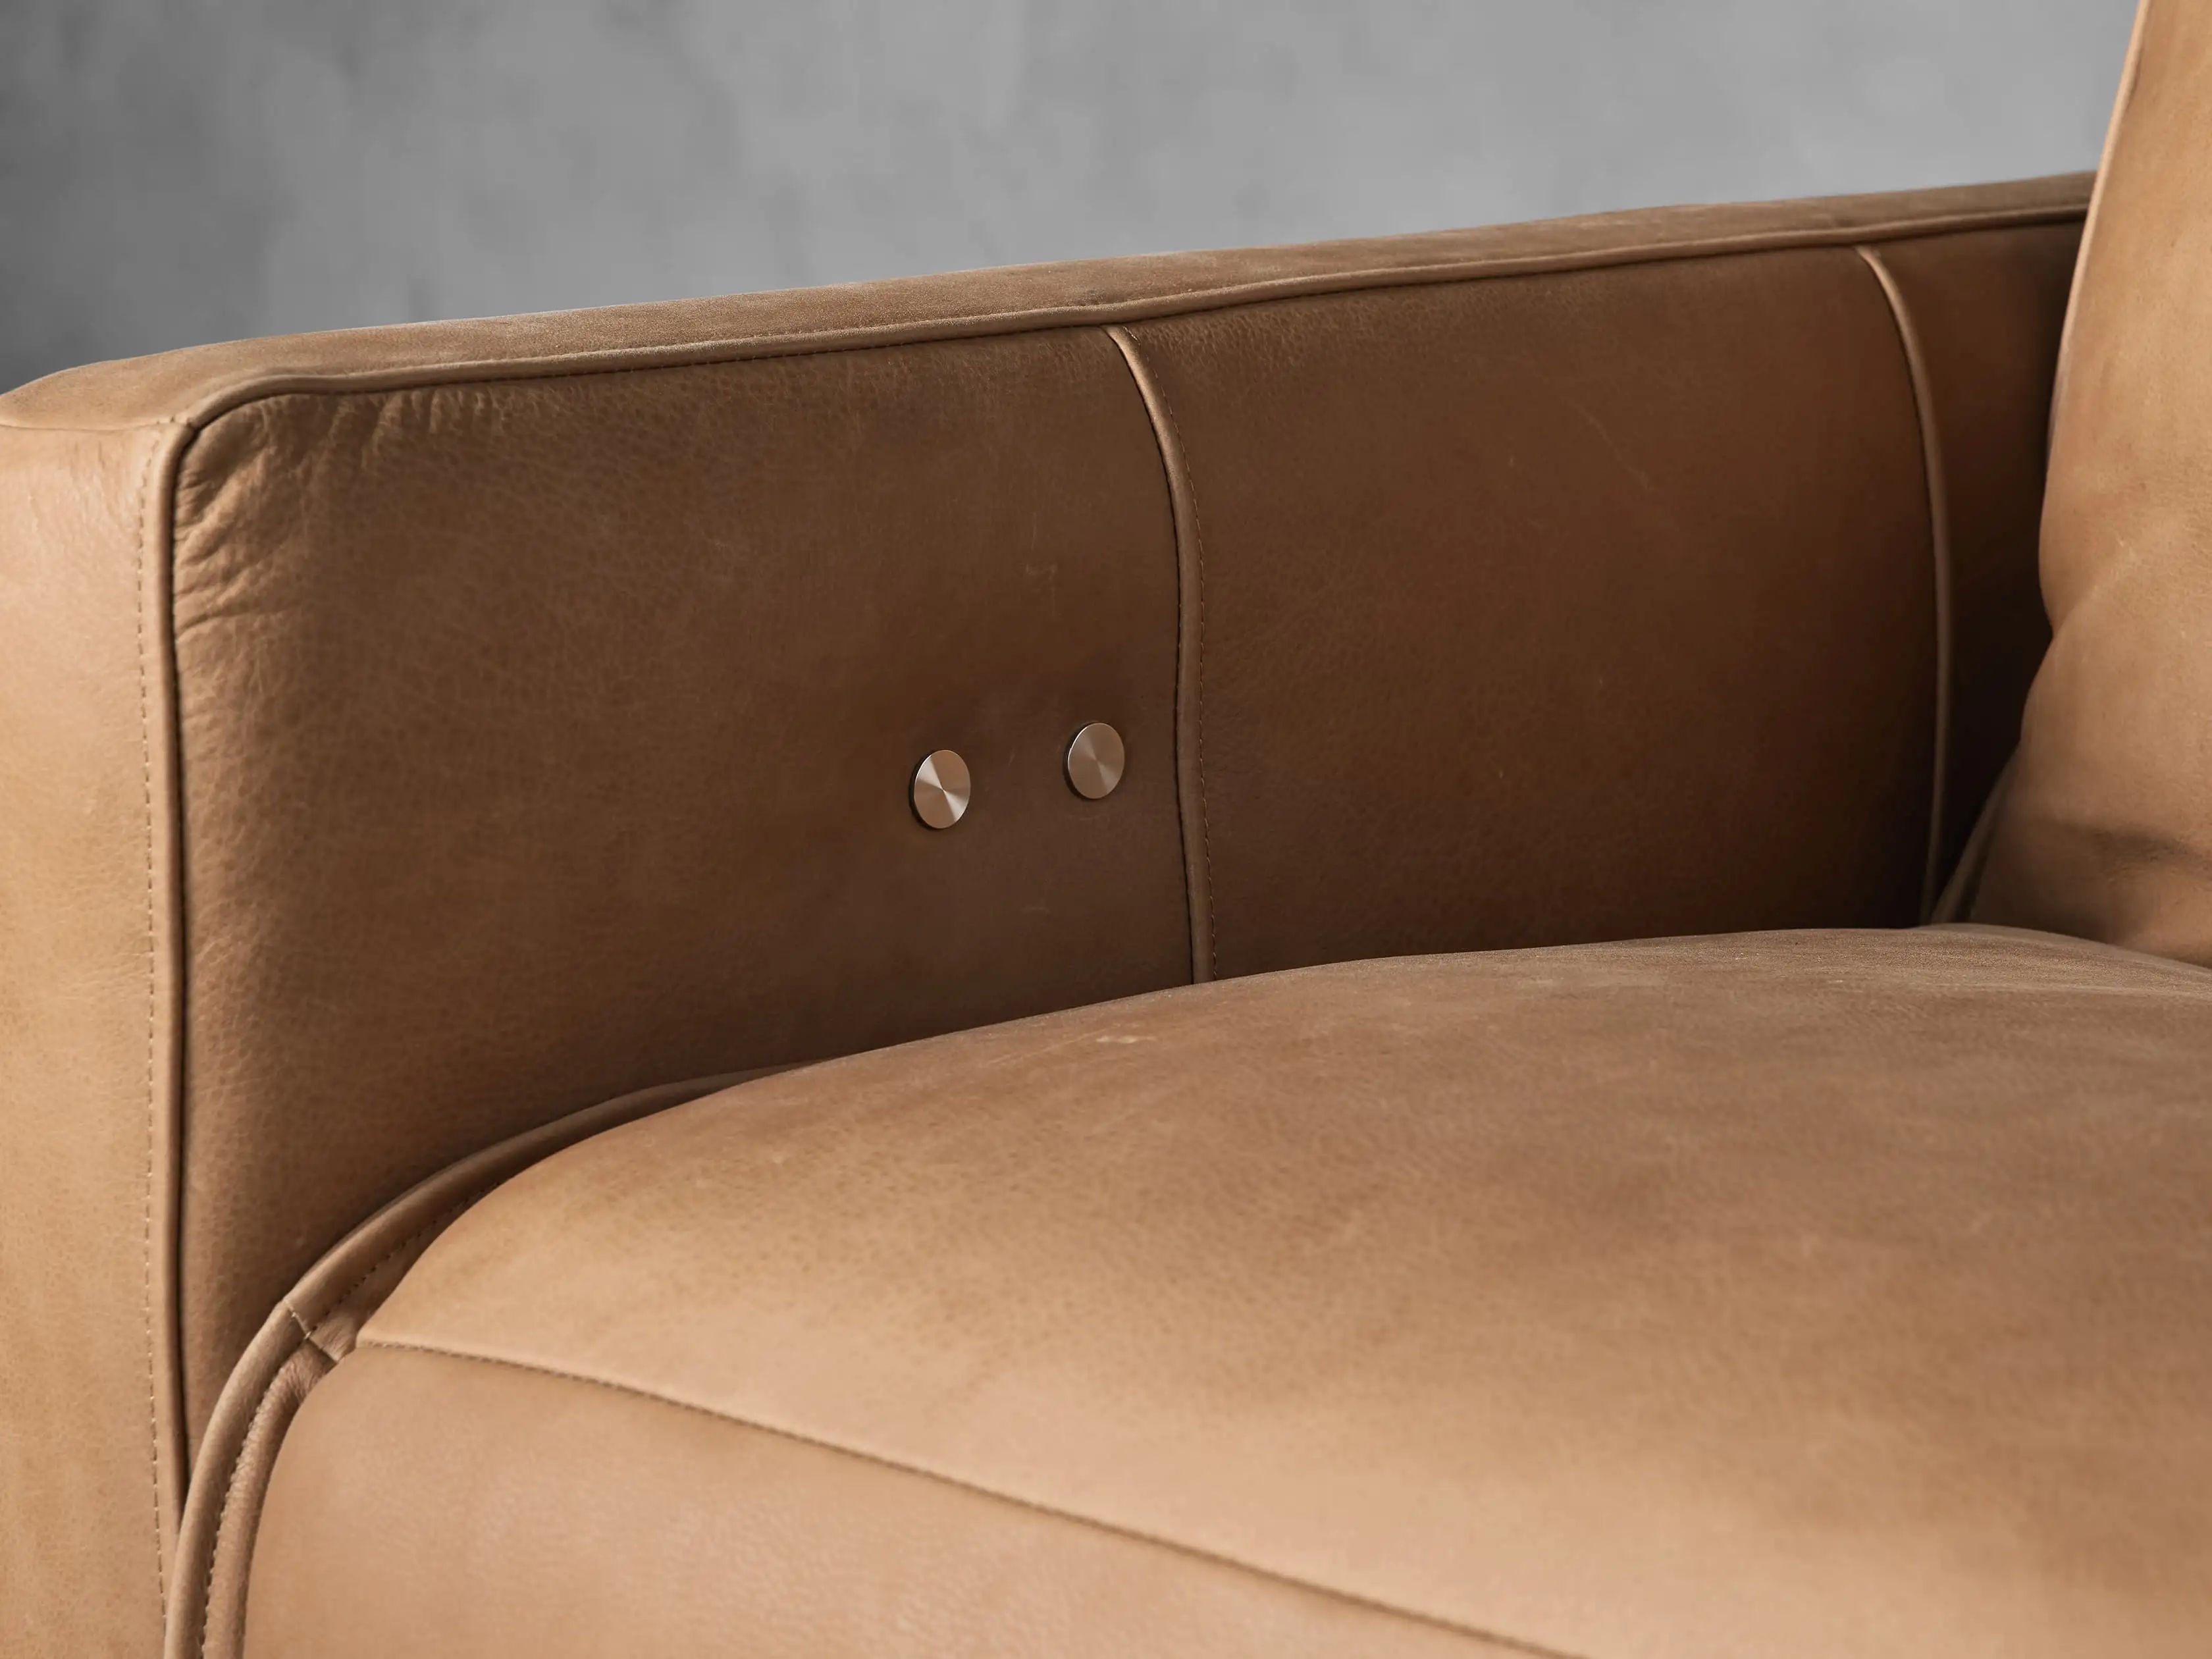 Rowland Leather Motion Recliner | Arhaus